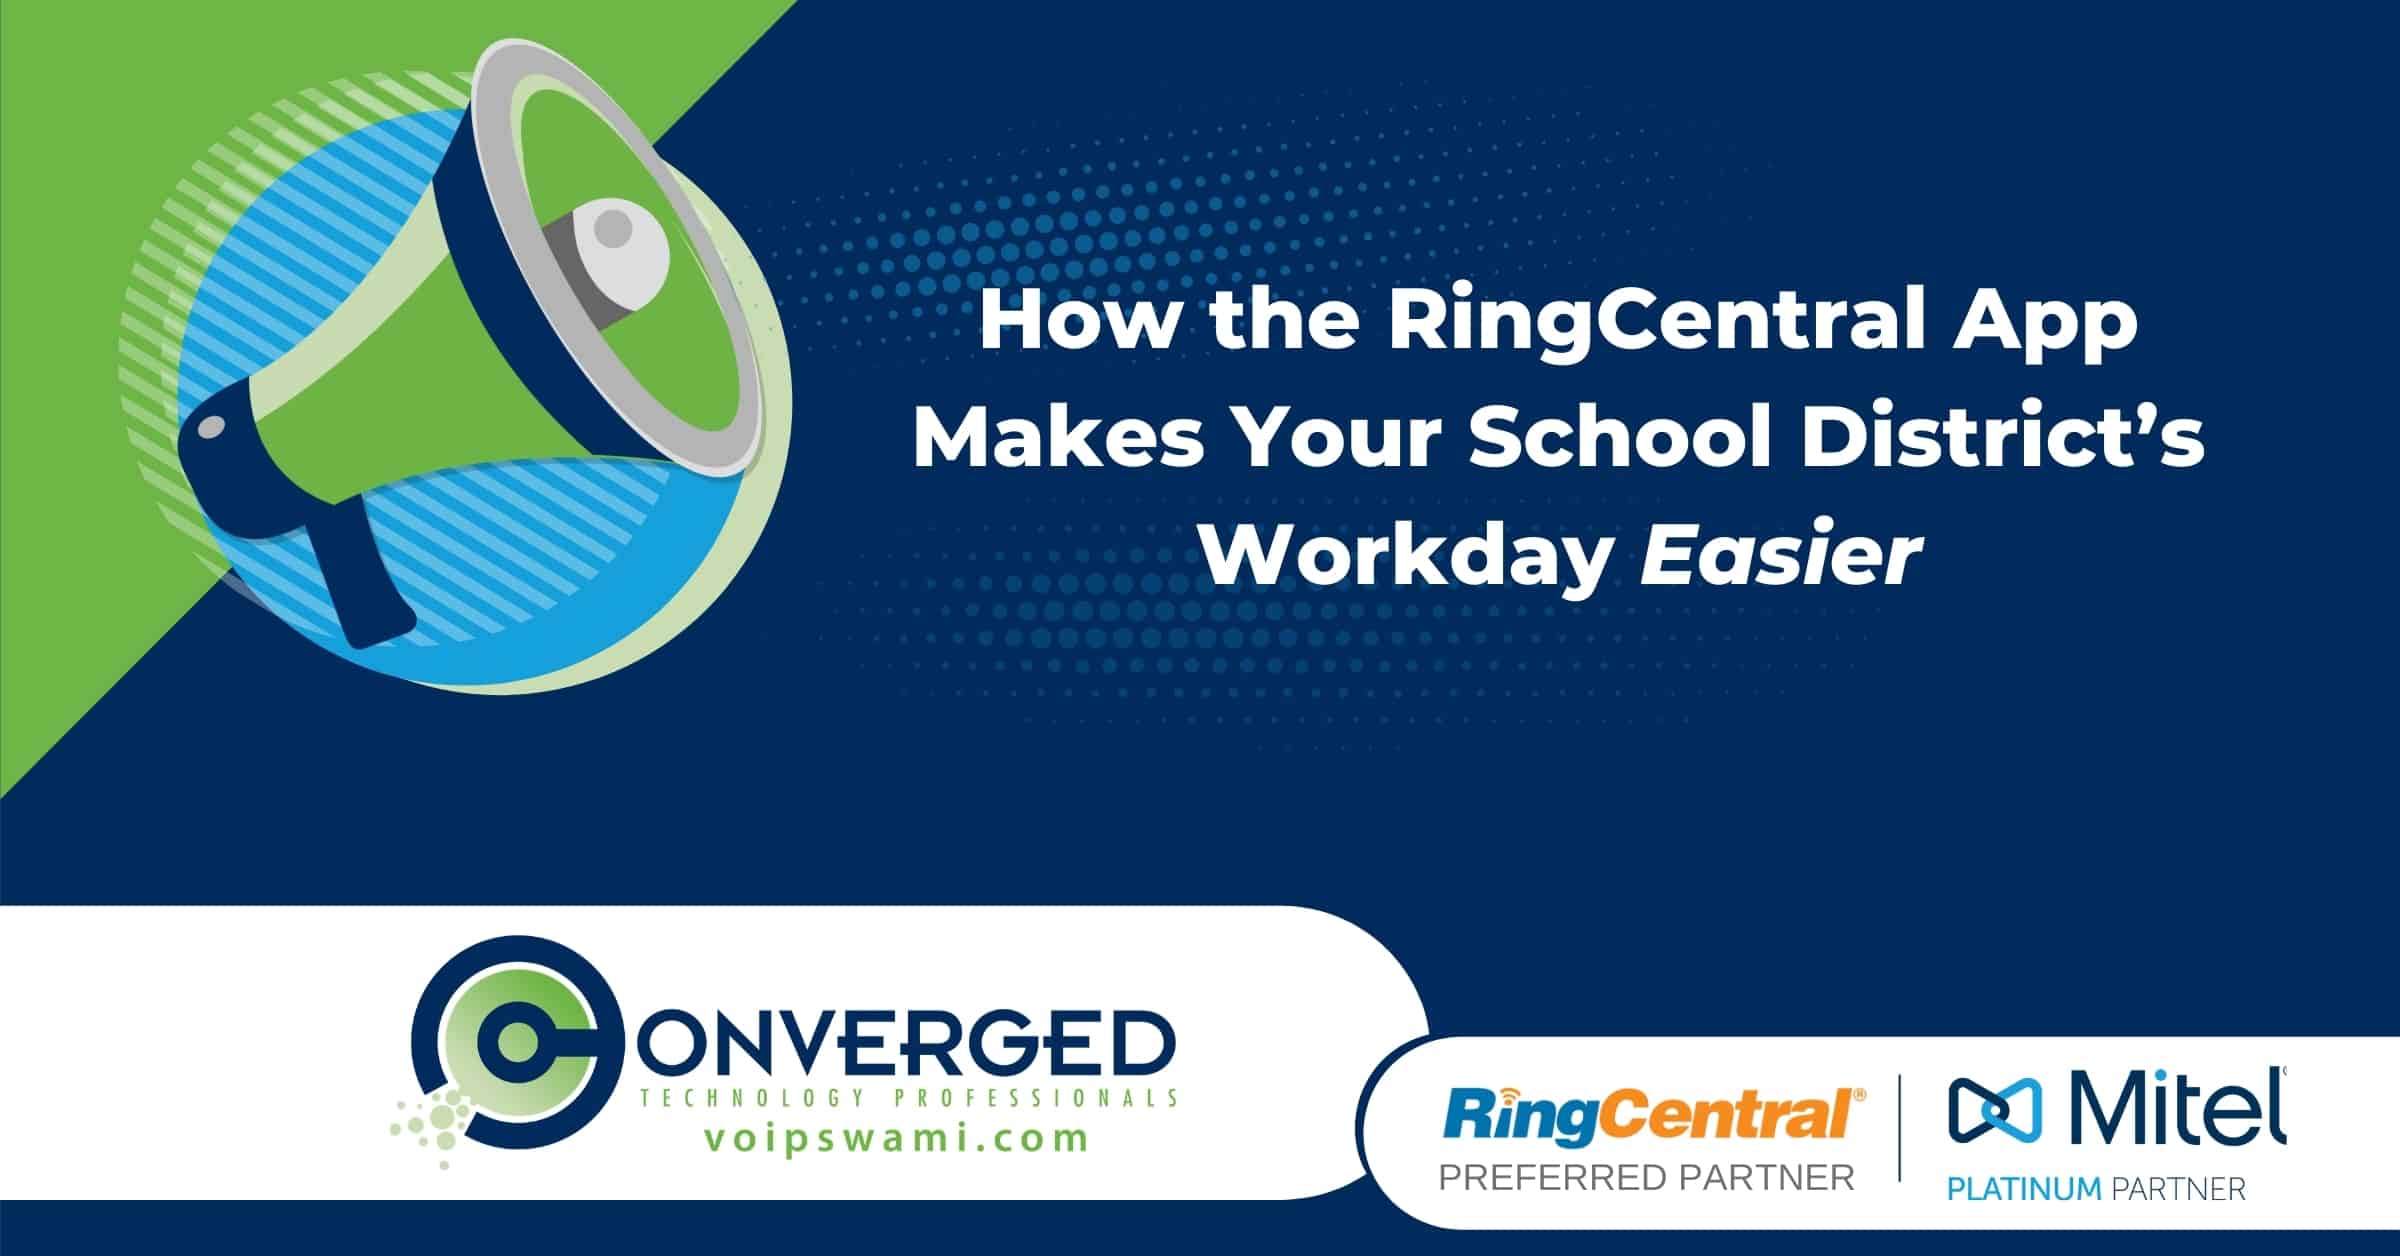 How the RingCentral App Makes Your School District's Workday Easier